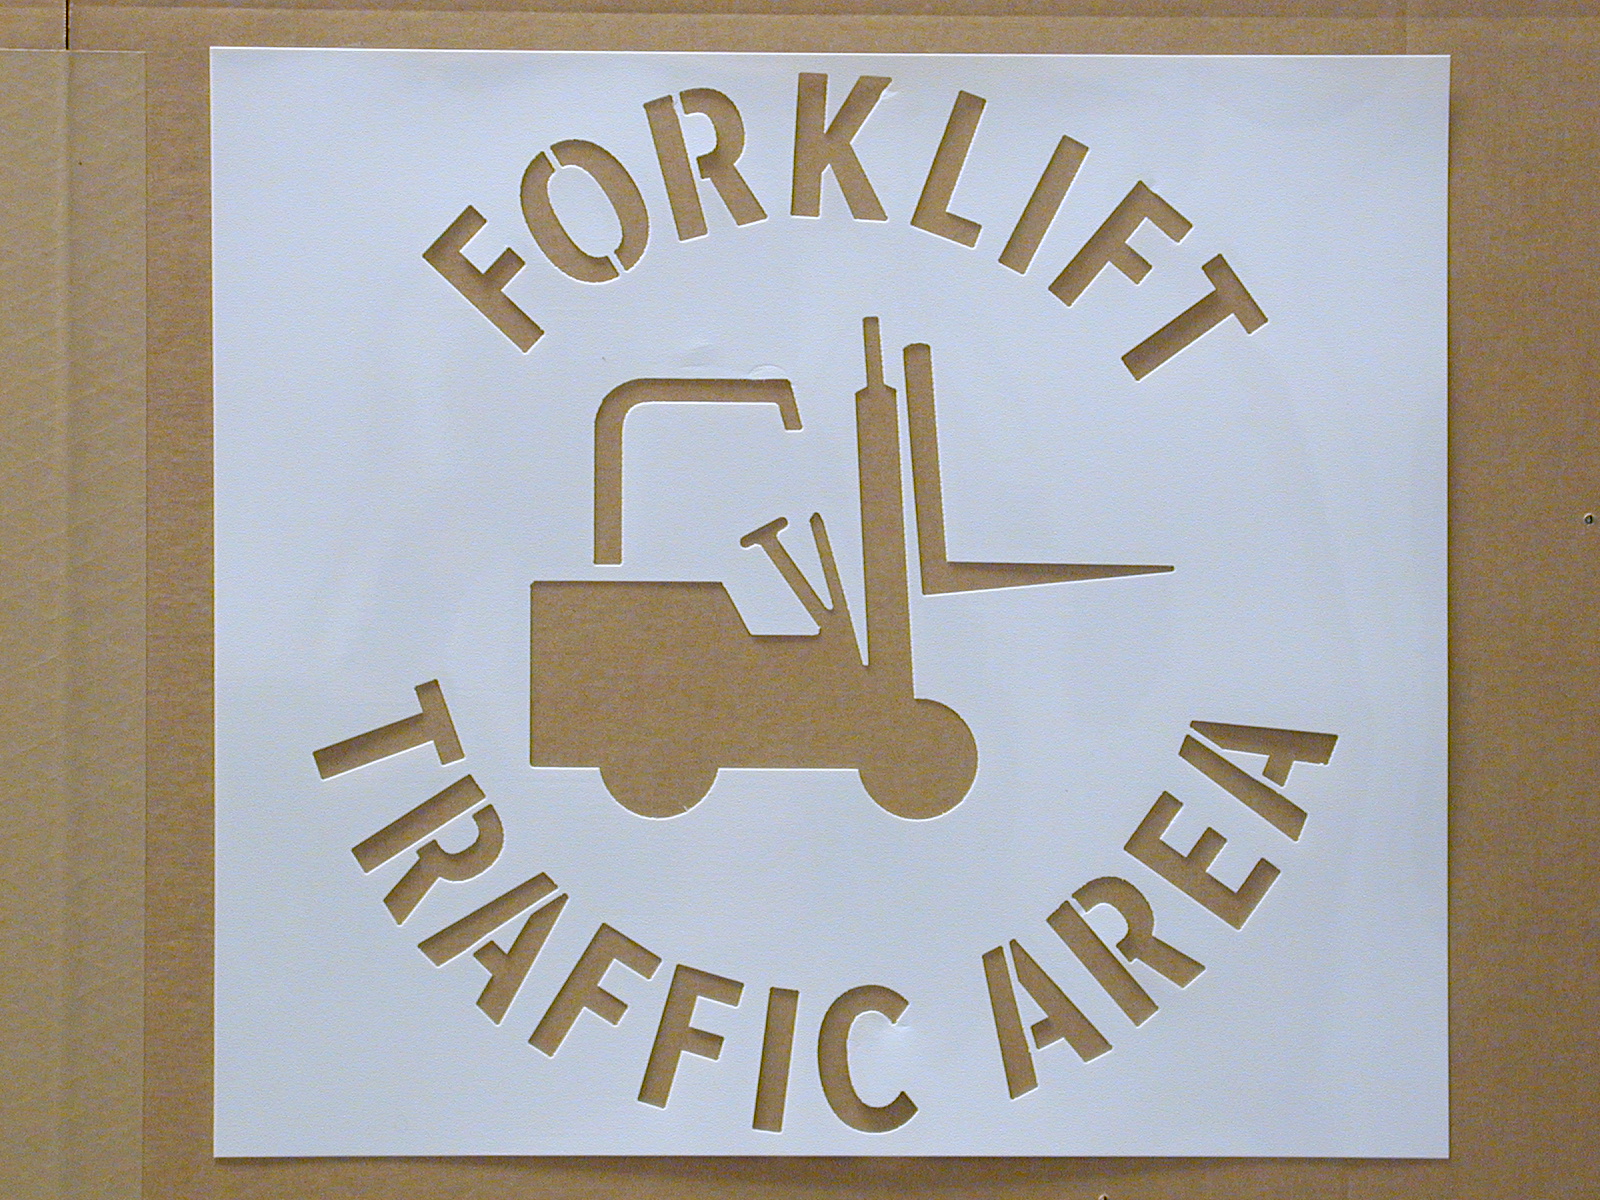 Promote Forklift Safety With Stencils A How To Guide Mysafetysign Blog